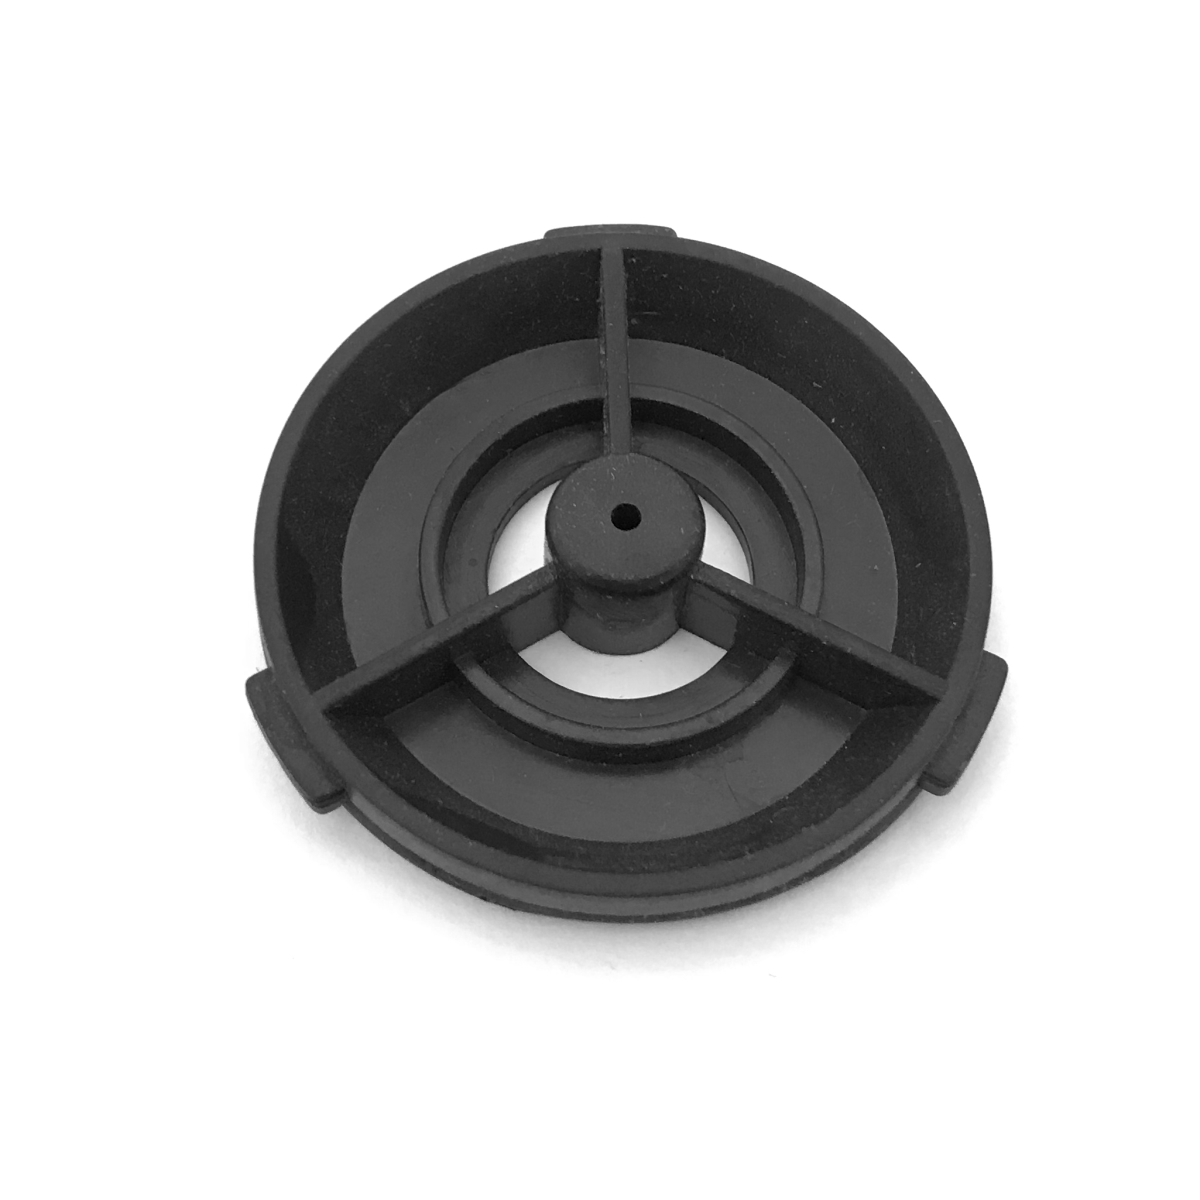 Su21732 Replacement Impeller Pump Cover & Seal For Sp-400